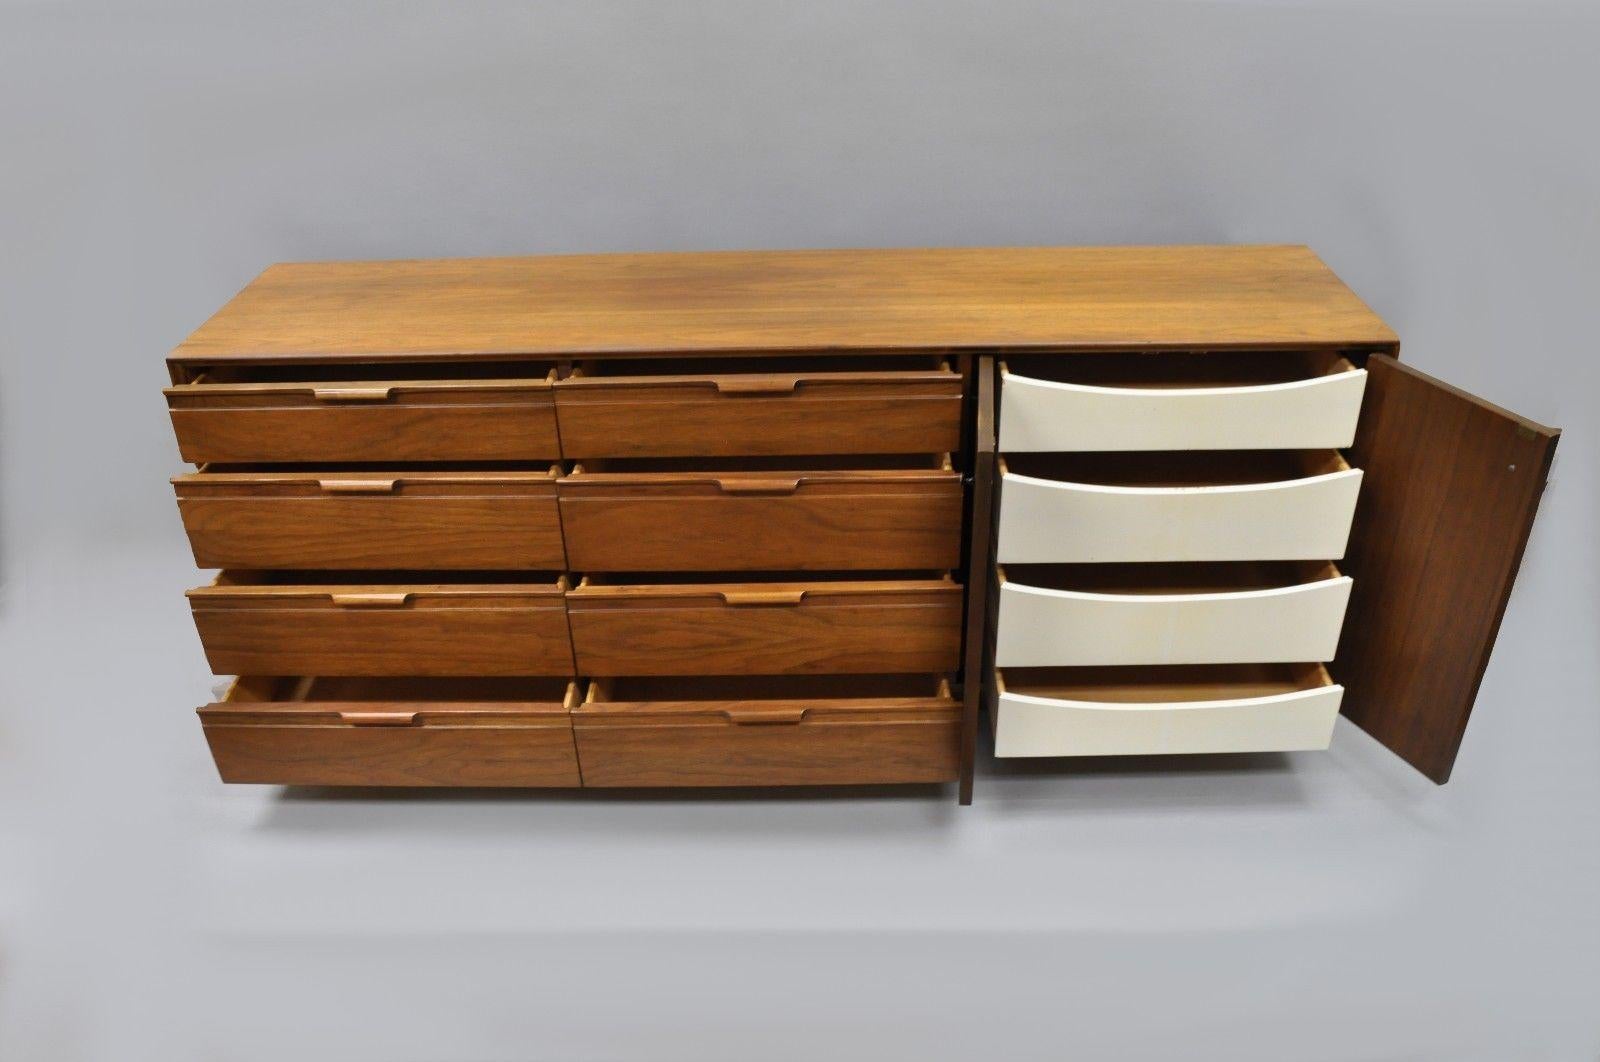 Vintage Mid-Century Modern walnut 12 drawer dresser by American of Martinsville. Item features sculpted wood and metal pulls, 12 dovetailed drawers, beautiful wood grain, signed inside drawer, white contrast painted concealed drawers, clean